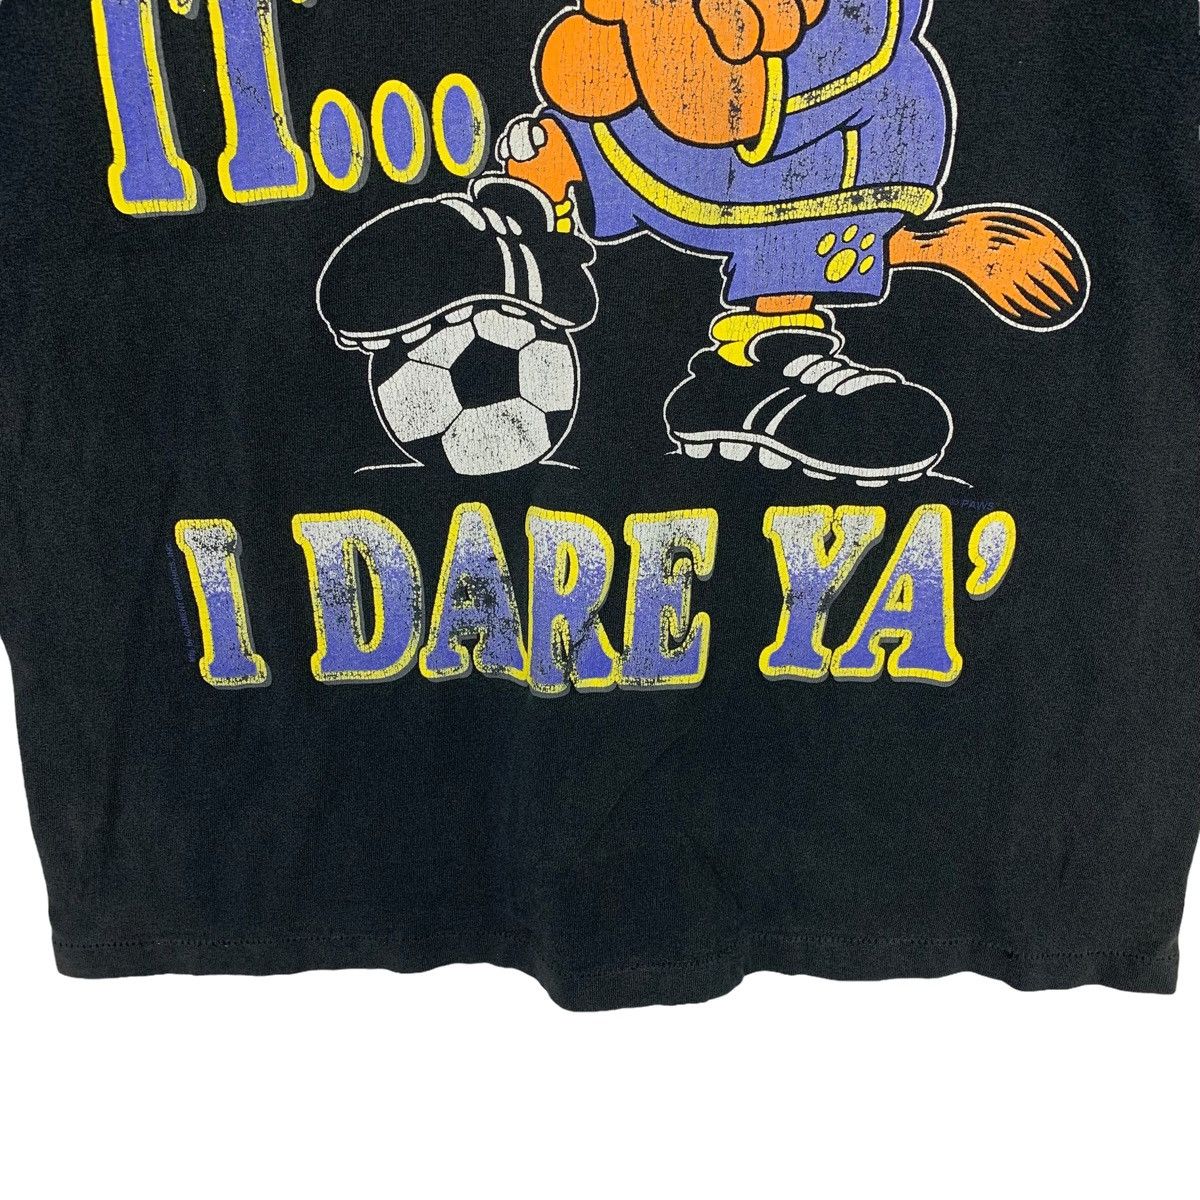 Vintage Rare!!Vintage 90s GARFIELD try it i dare ya spellout printed Size US L / EU 52-54 / 3 - 4 Thumbnail